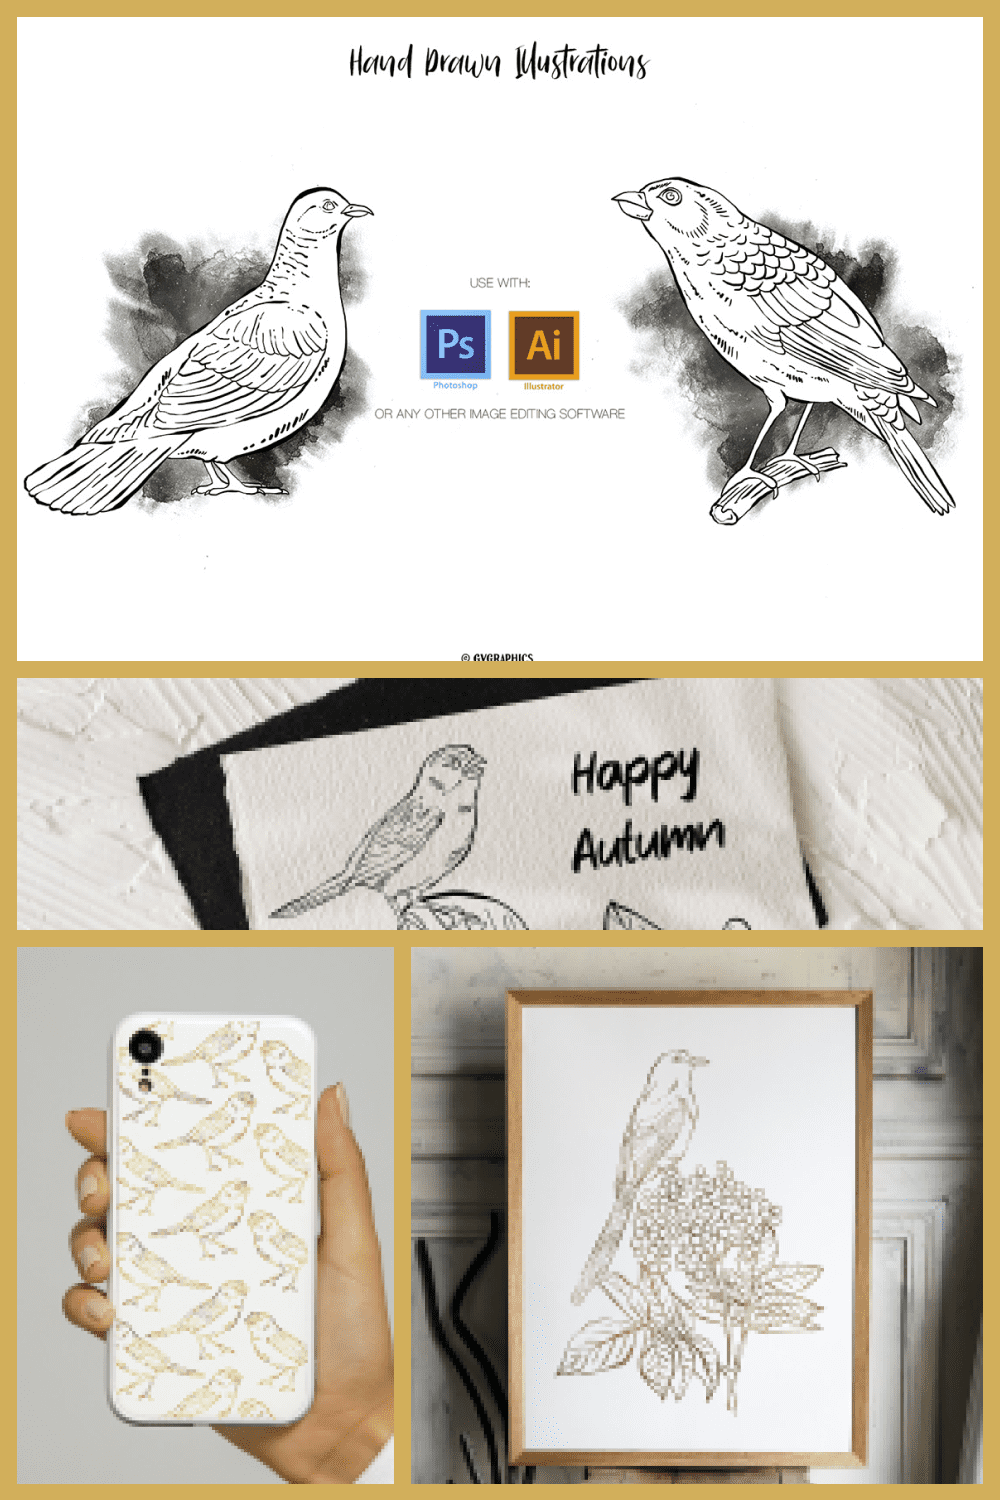 Hand Drawn Birds, Leaves and Berries in Black and White - MasterBundles - Pinterest Collage Image.